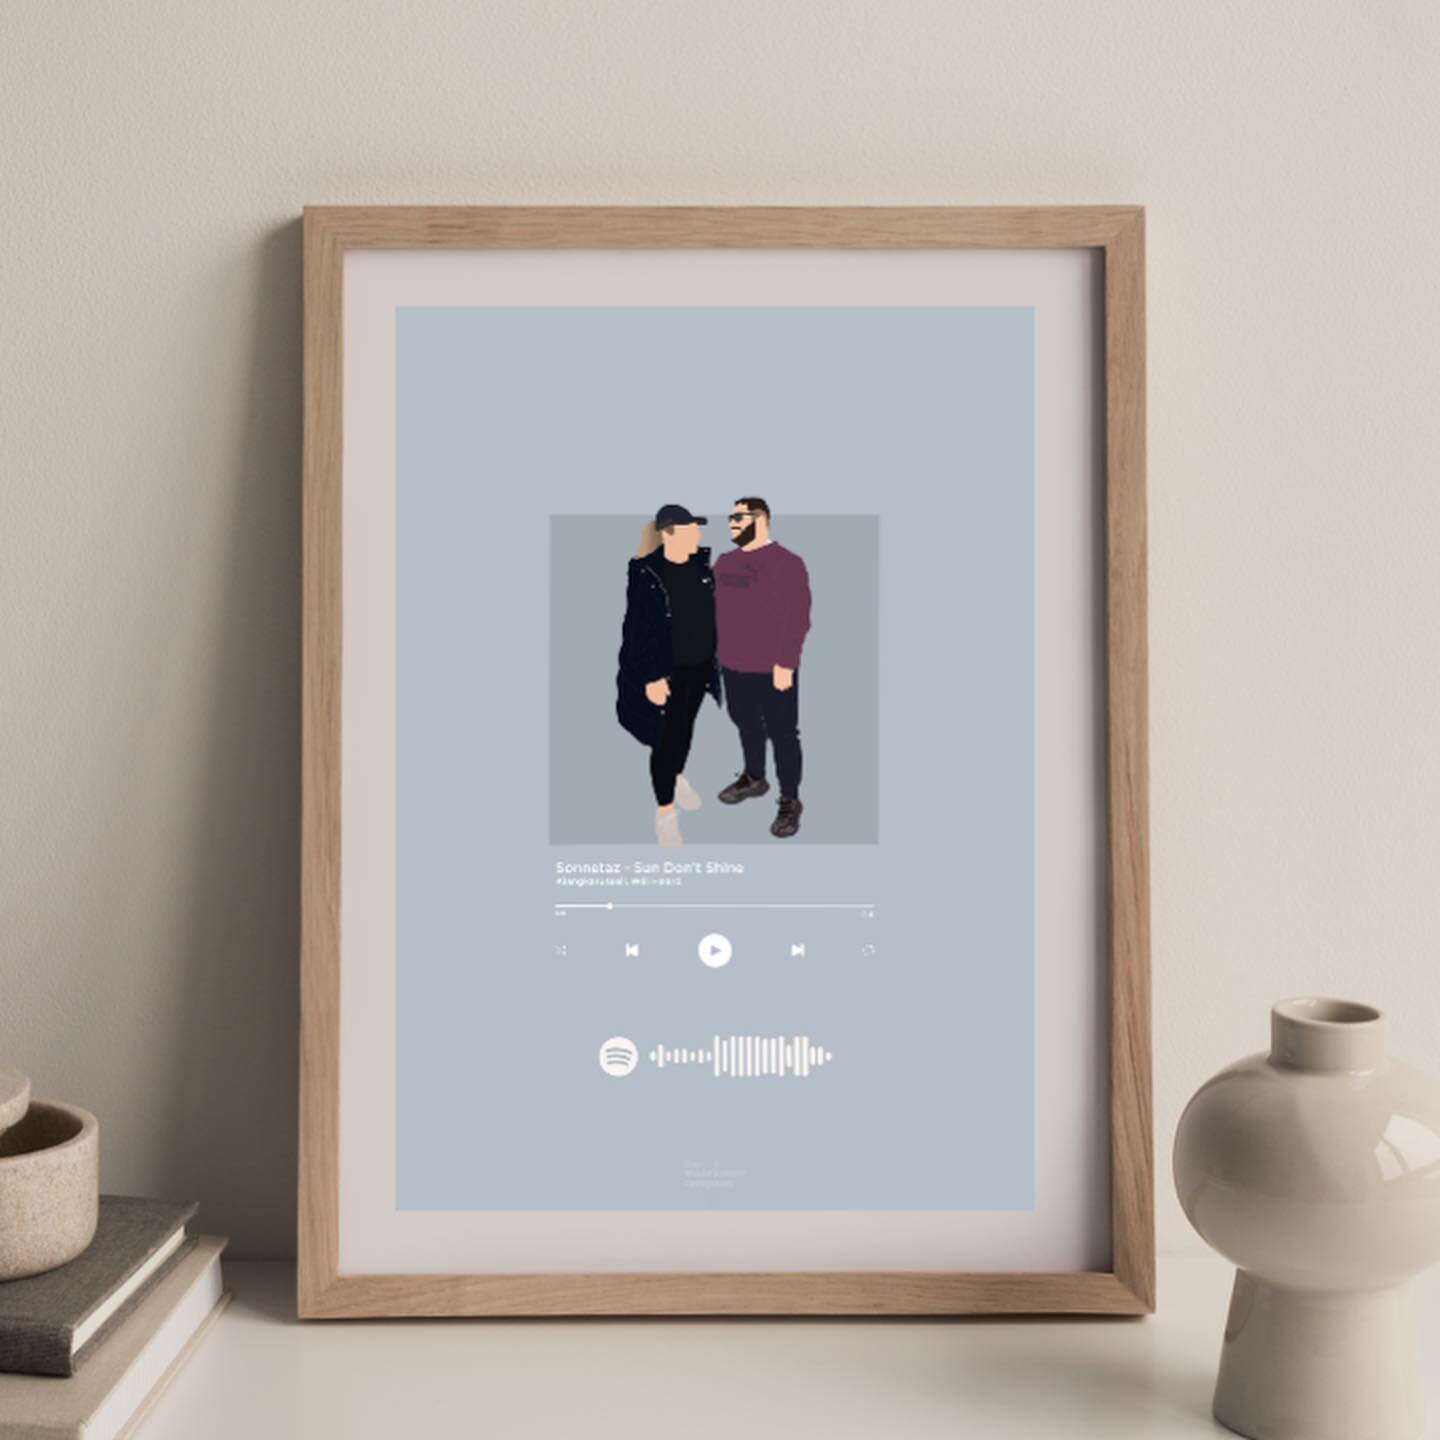 do you love music and want to add a personal touch to your room or workspace? ✨🎵

check out our custom spotify prints! we'll turn your favorite song into a sleek and stylish print, complete with a custom image and a scannable spotify code! &hearts;️